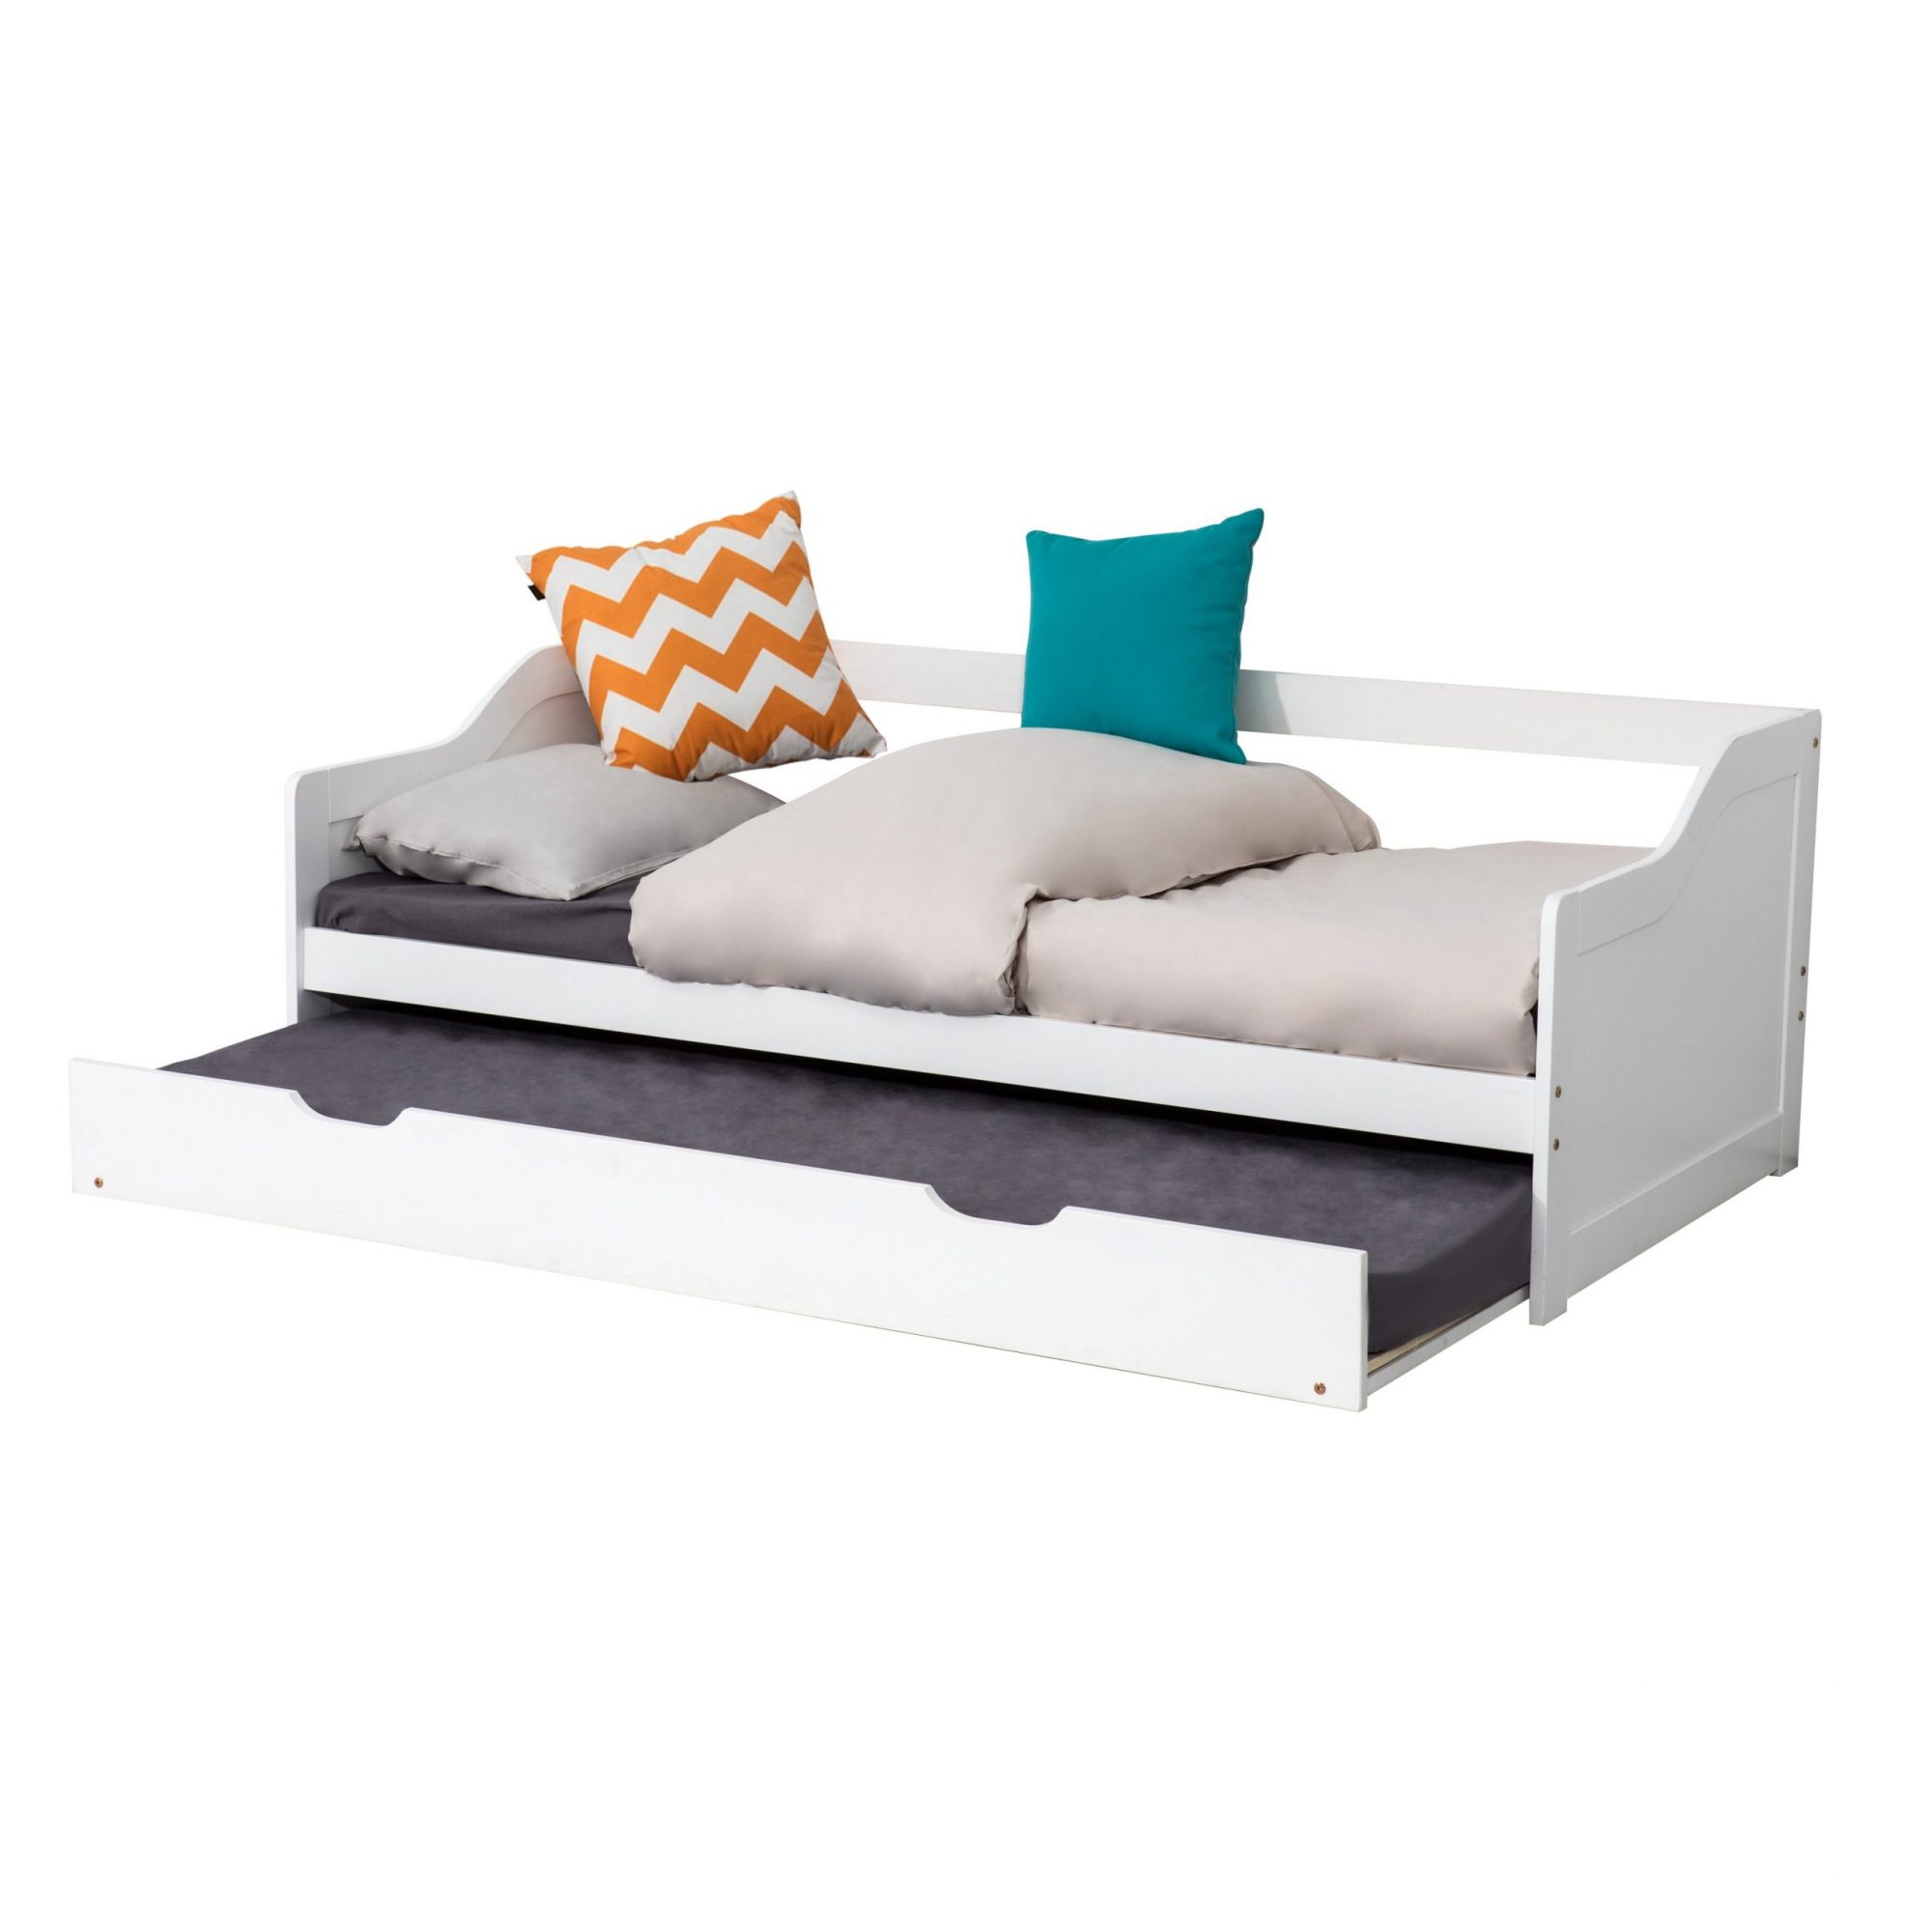 DREAMO Wooden Timber Sofa Trundle Bed Frame